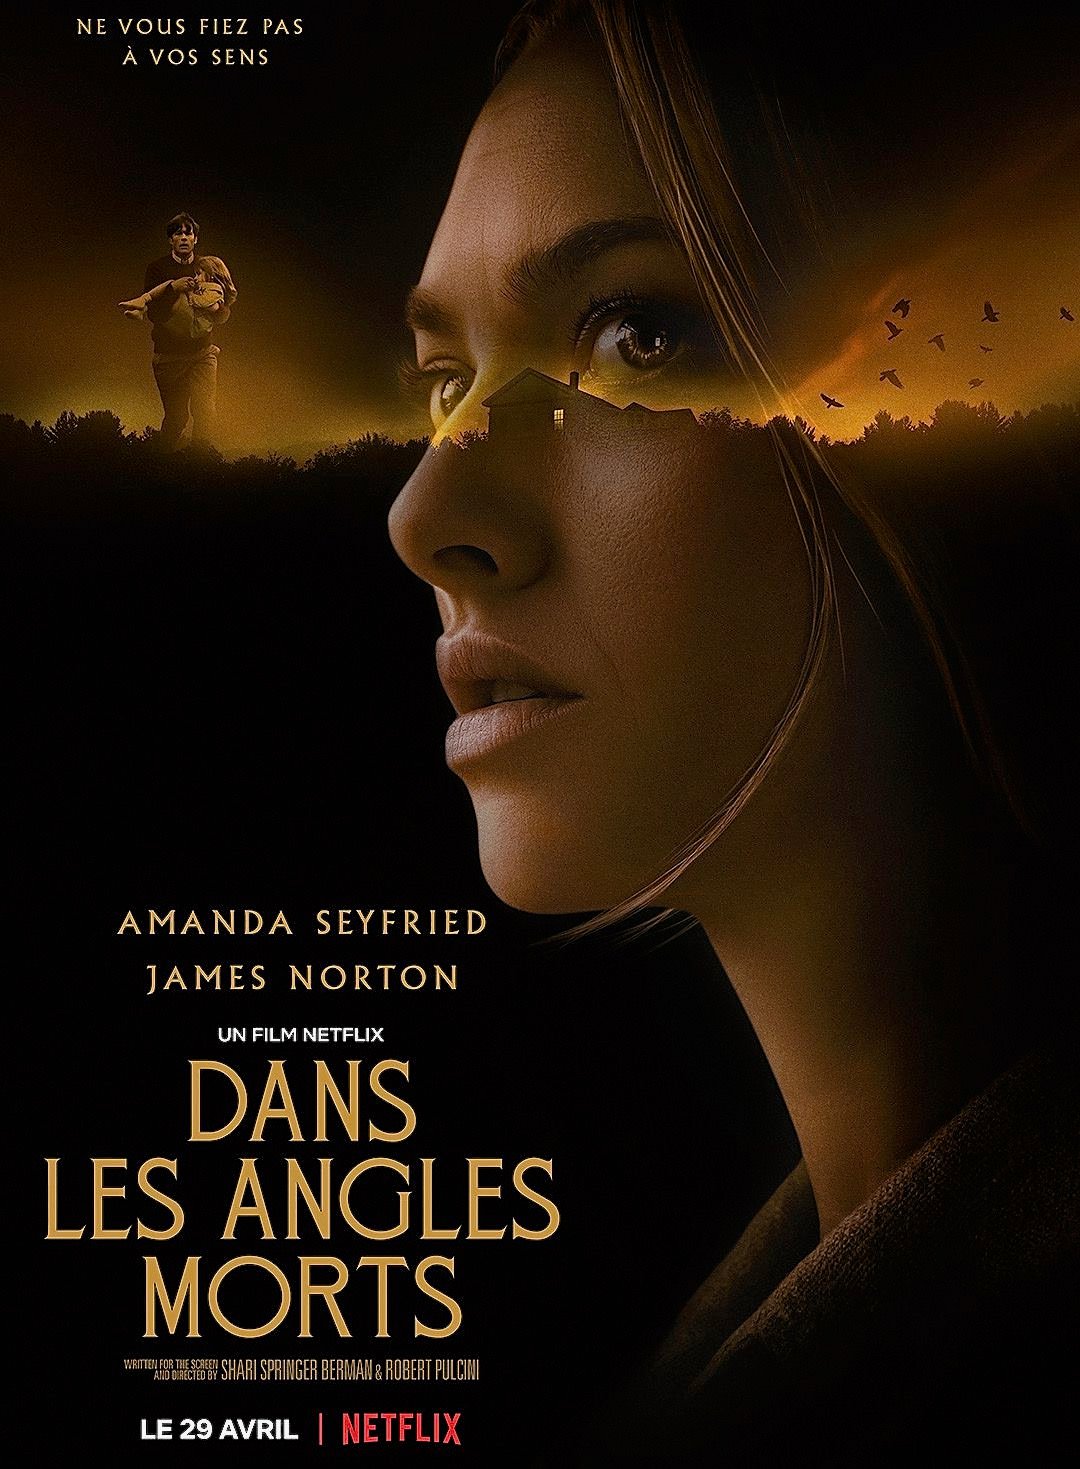 Dans les angles morts - Film (2021) streaming VF gratuit complet